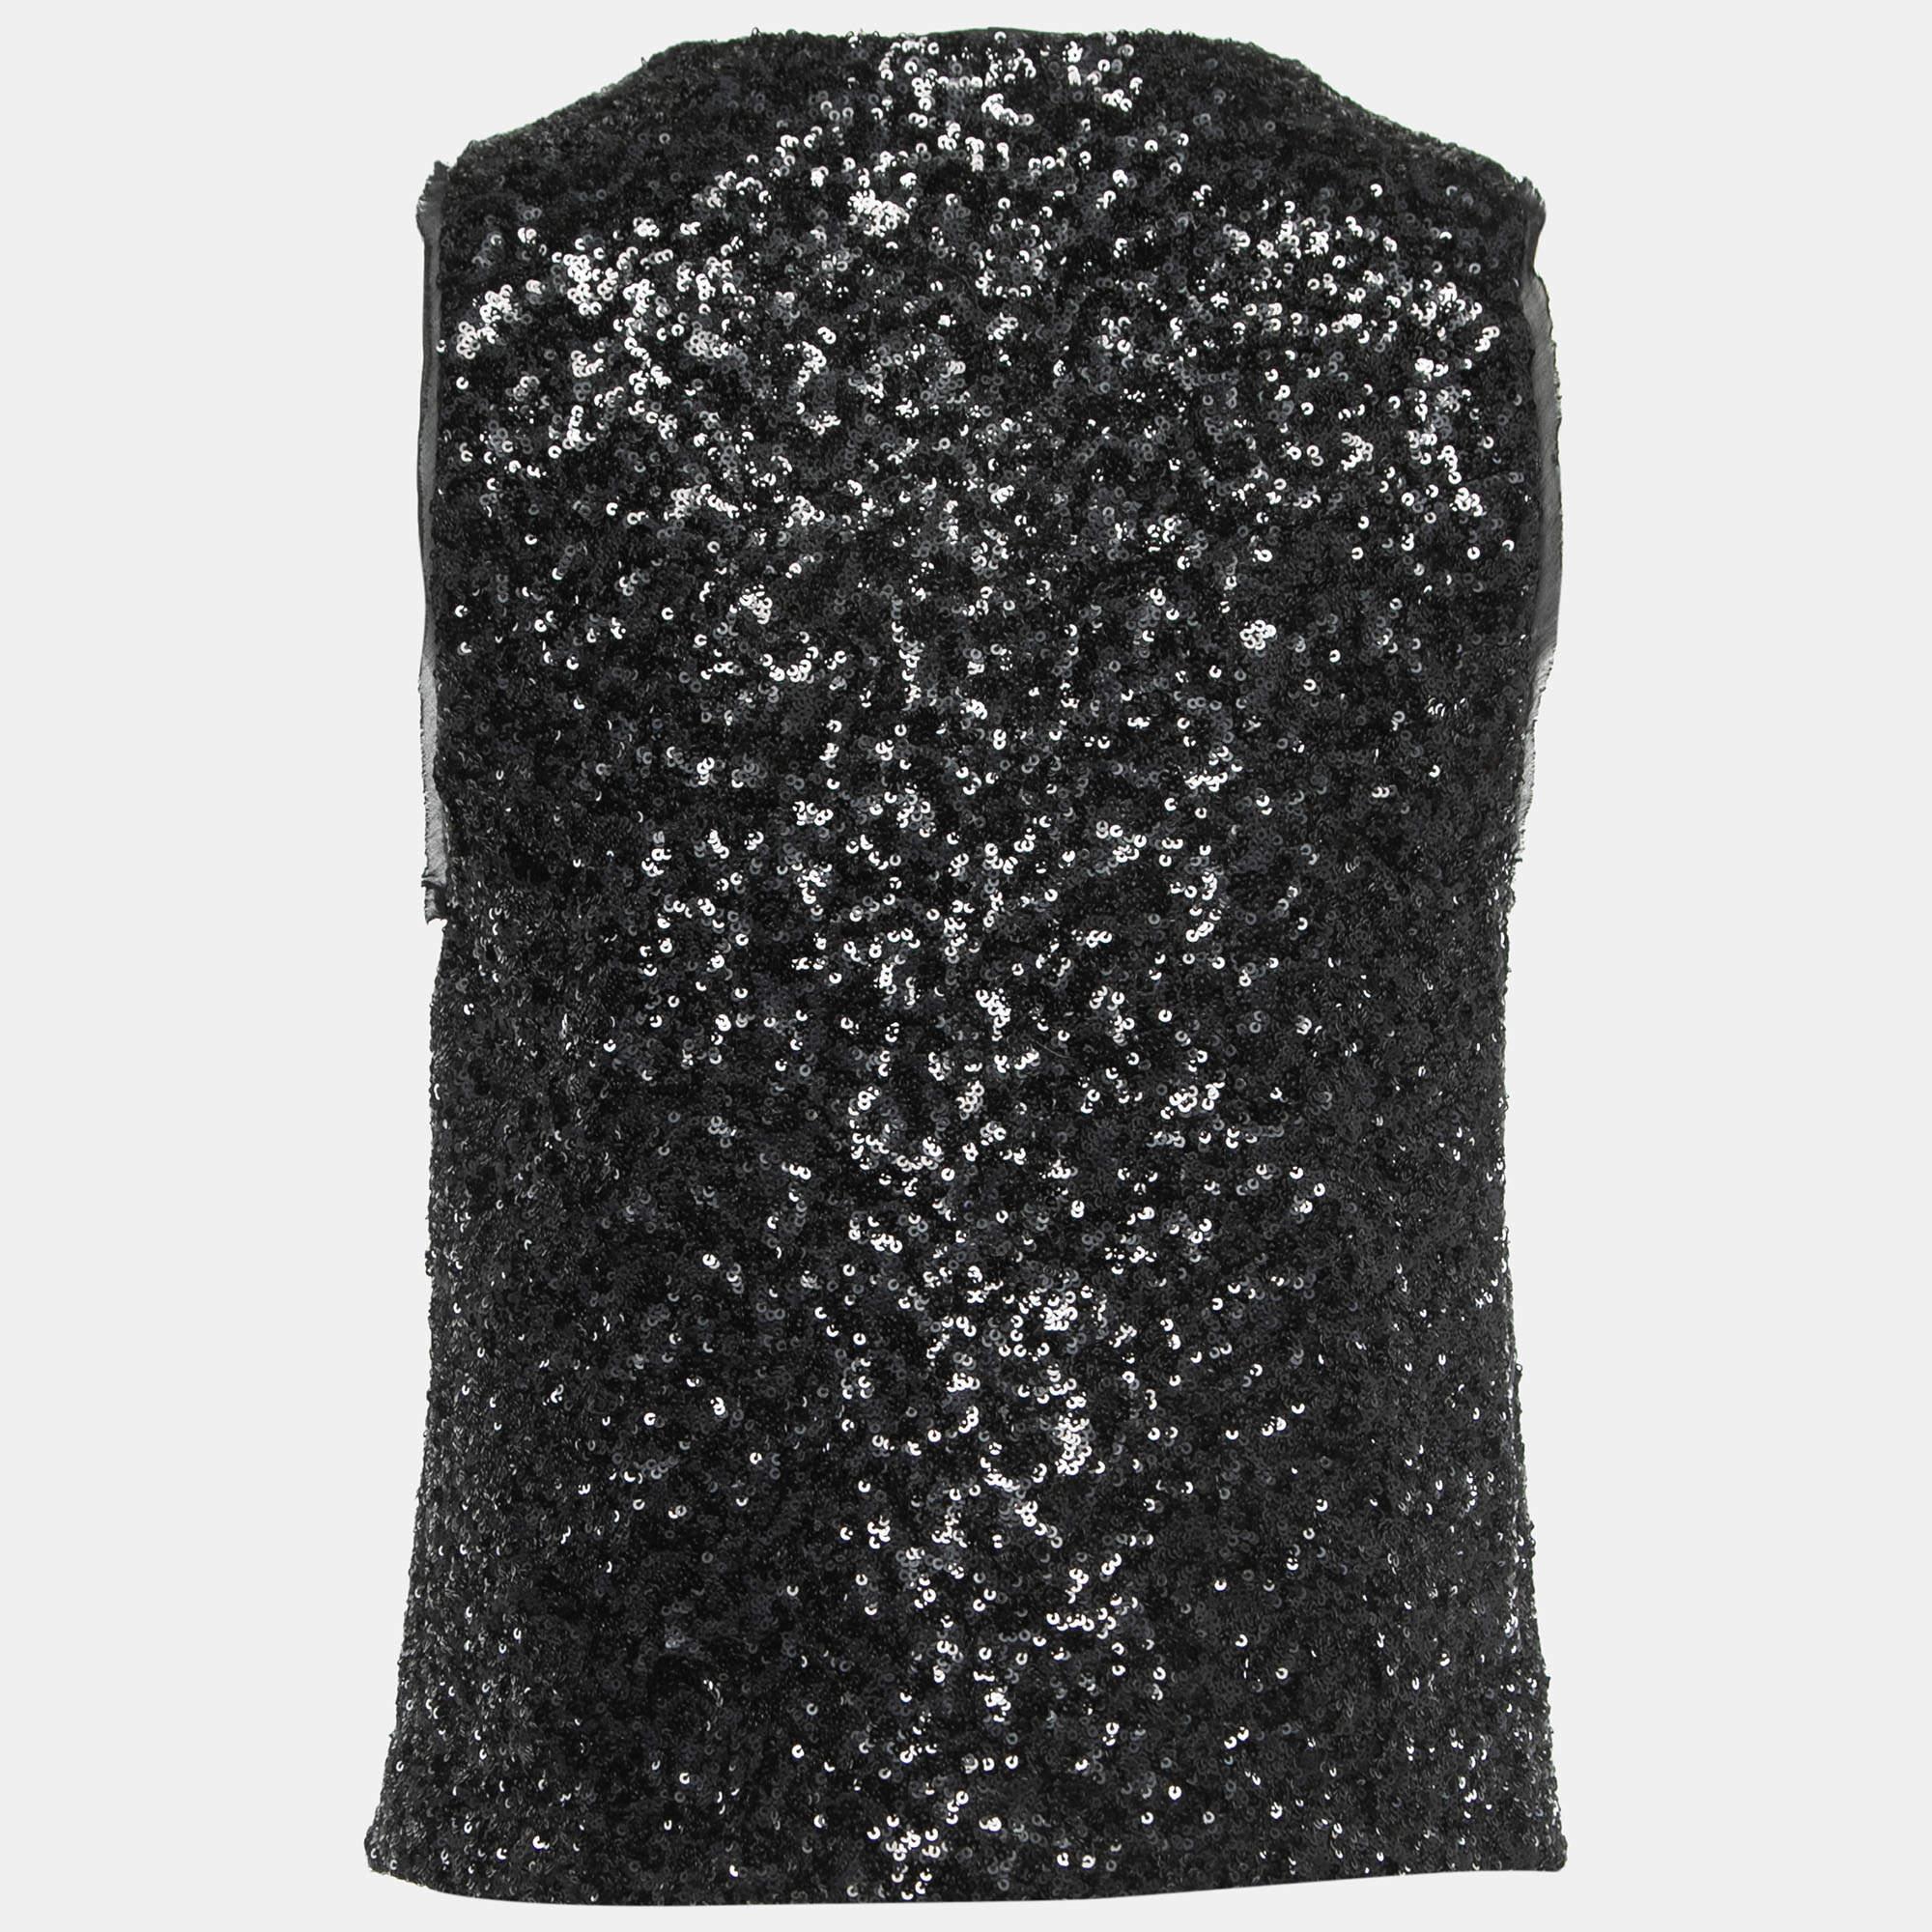 The Zadig & Voltaire vest is a luxurious and edgy fashion piece. It features intricate black sequins meticulously sewn onto a tailored vest, creating a dazzling, eye-catching effect. This versatile vest adds a touch of glam to any outfit, making it